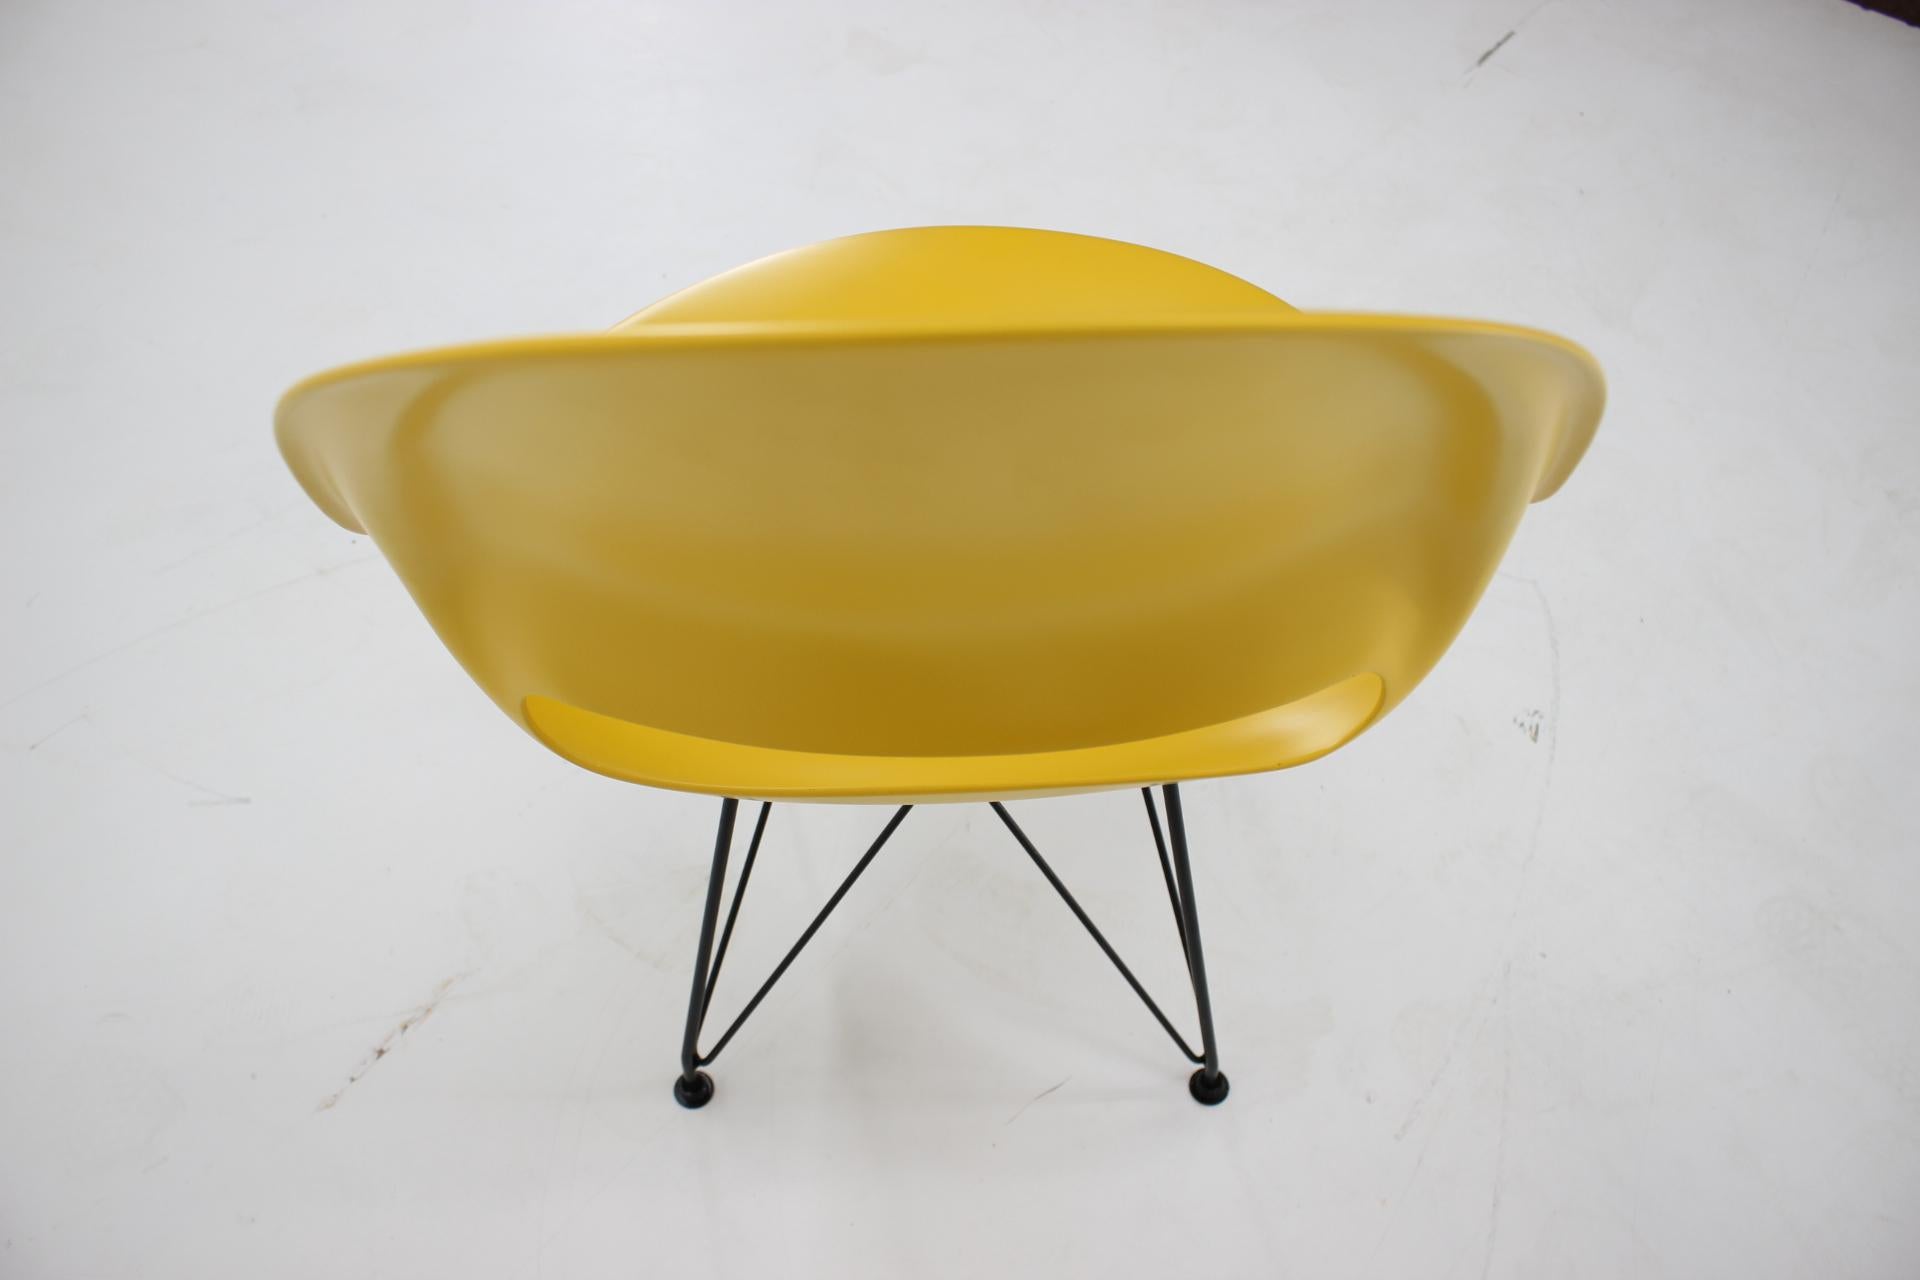 Set of 4 Midcentury Yellow Design Fiberglass Dining Chairs by M.Navratil, 1960s For Sale 9